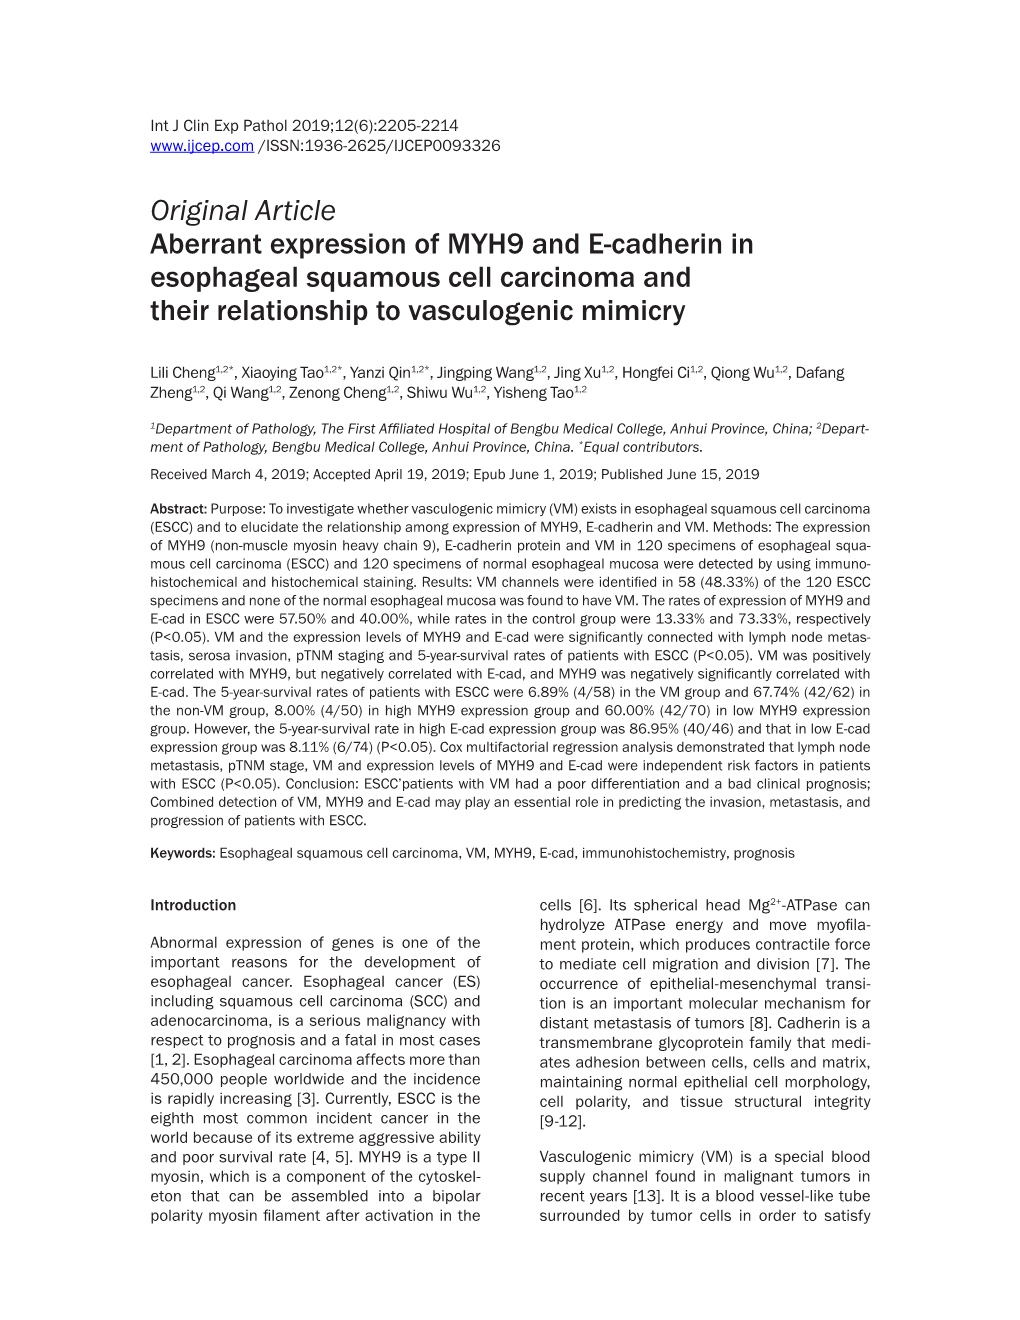 Original Article Aberrant Expression of MYH9 and E-Cadherin in Esophageal Squamous Cell Carcinoma and Their Relationship to Vasculogenic Mimicry